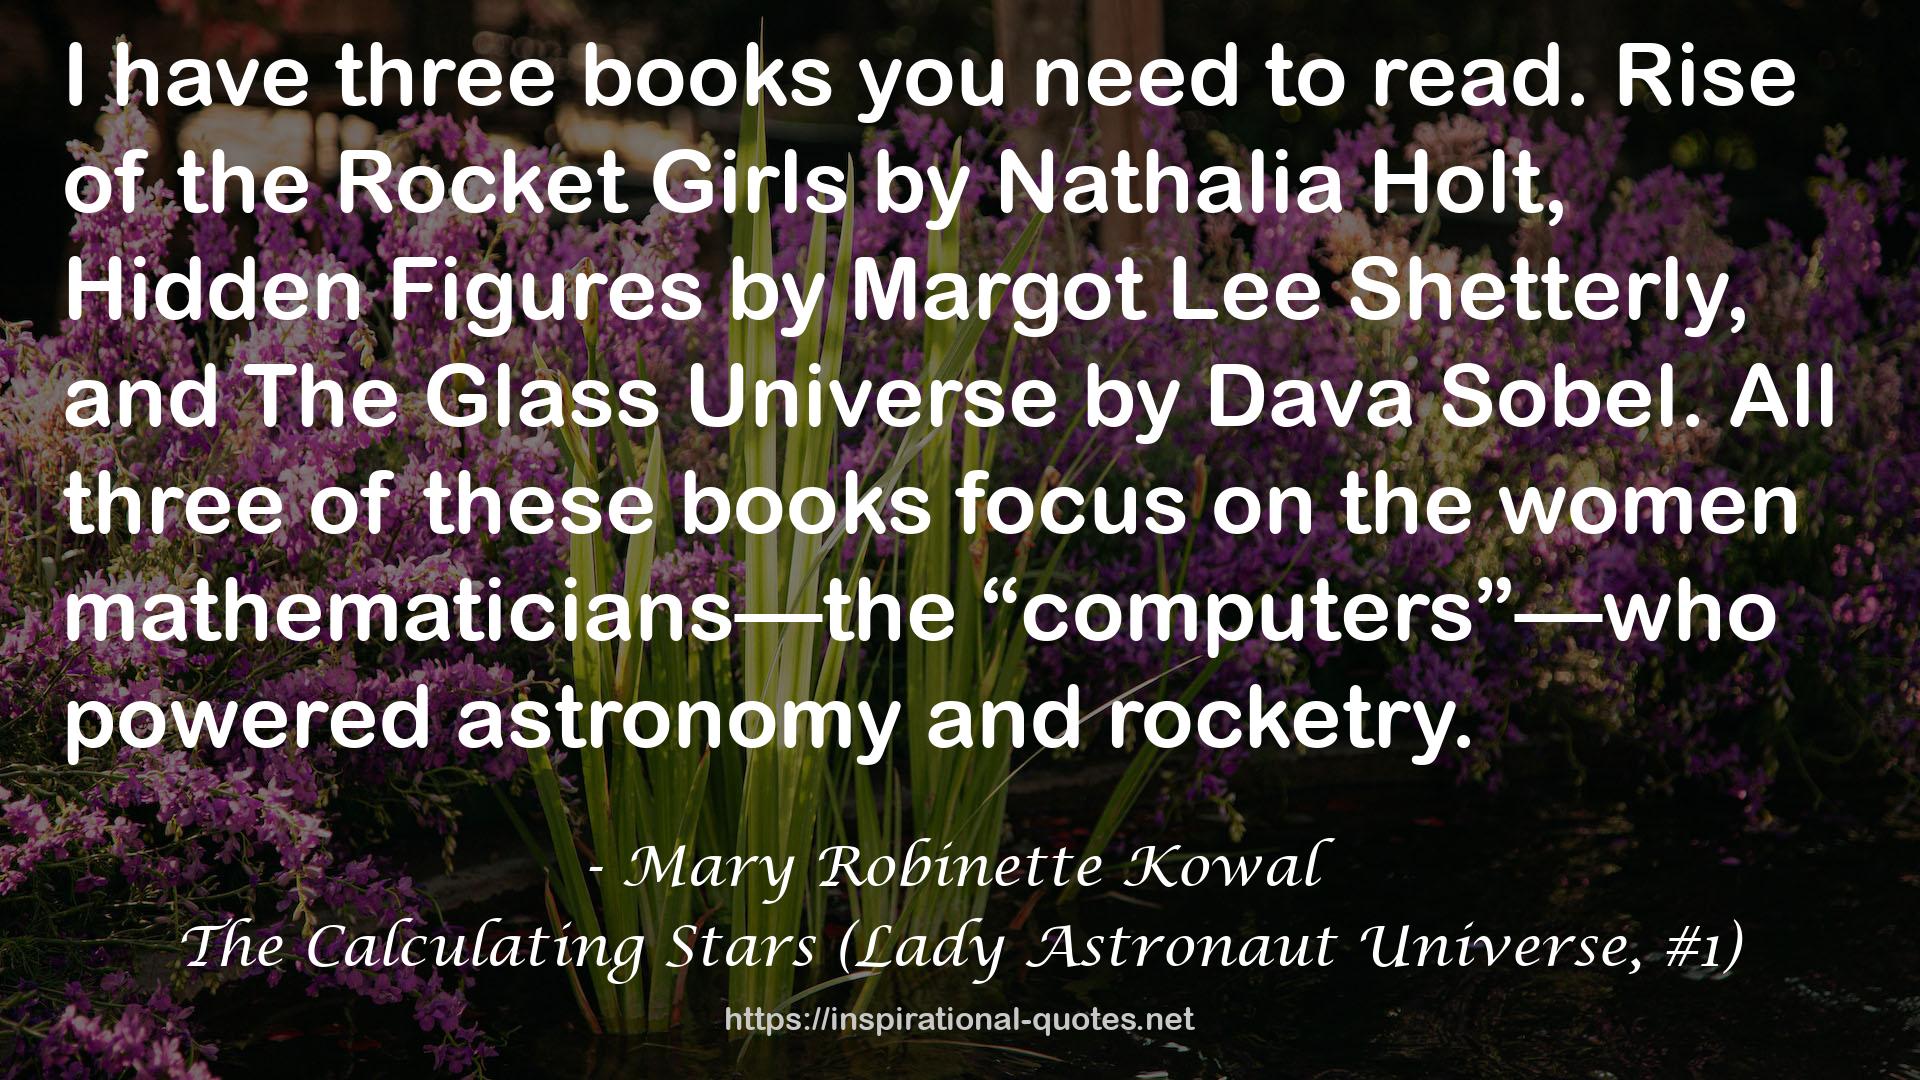 The Calculating Stars (Lady Astronaut Universe, #1) QUOTES